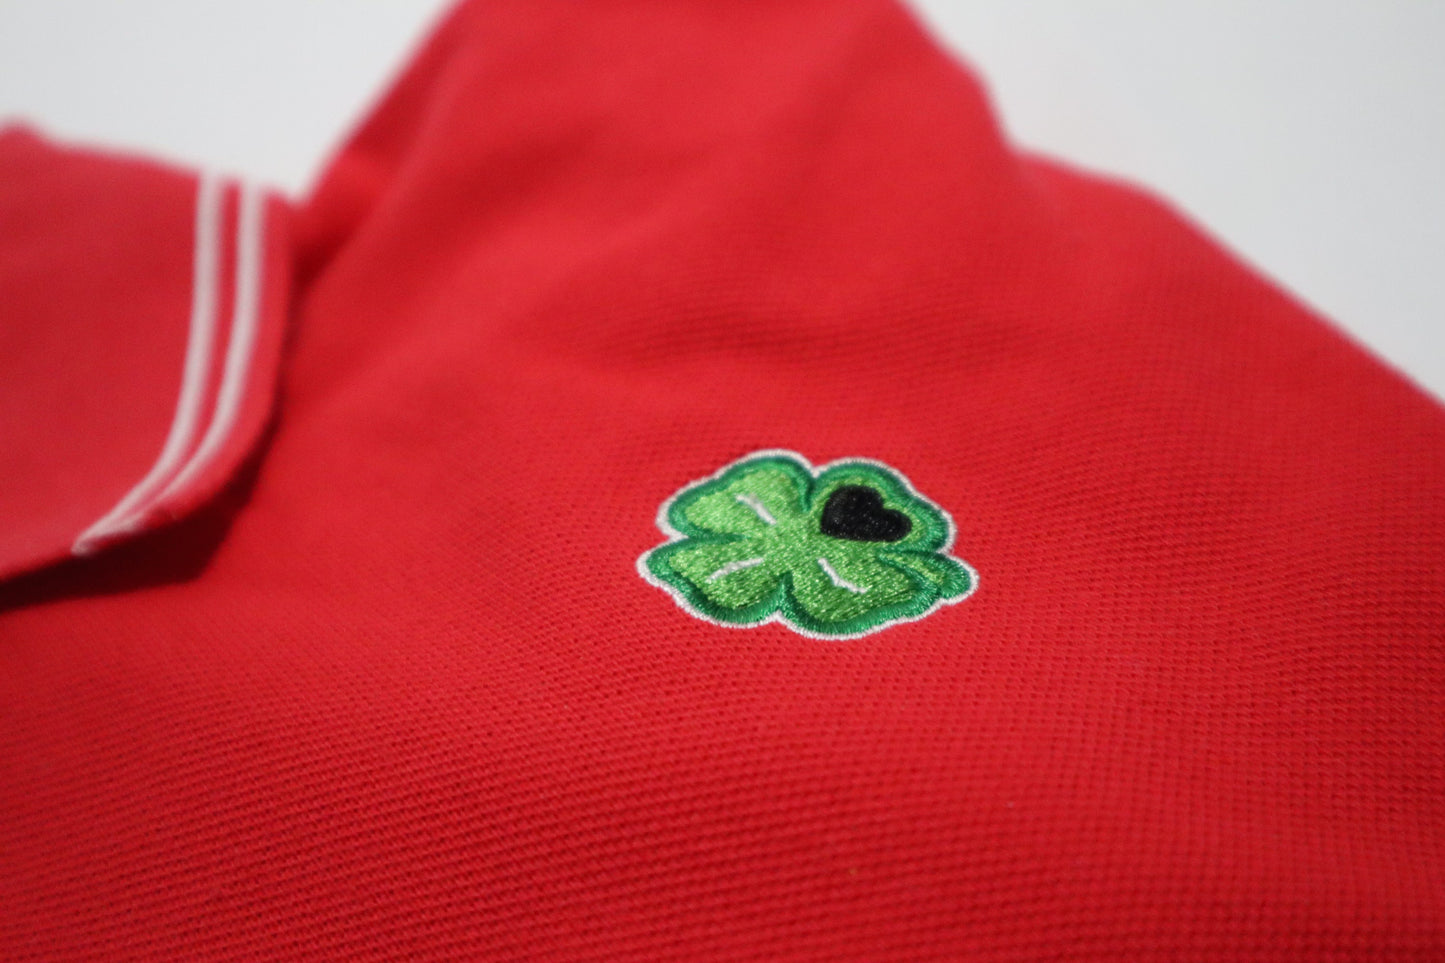 Scarlet Red Polo